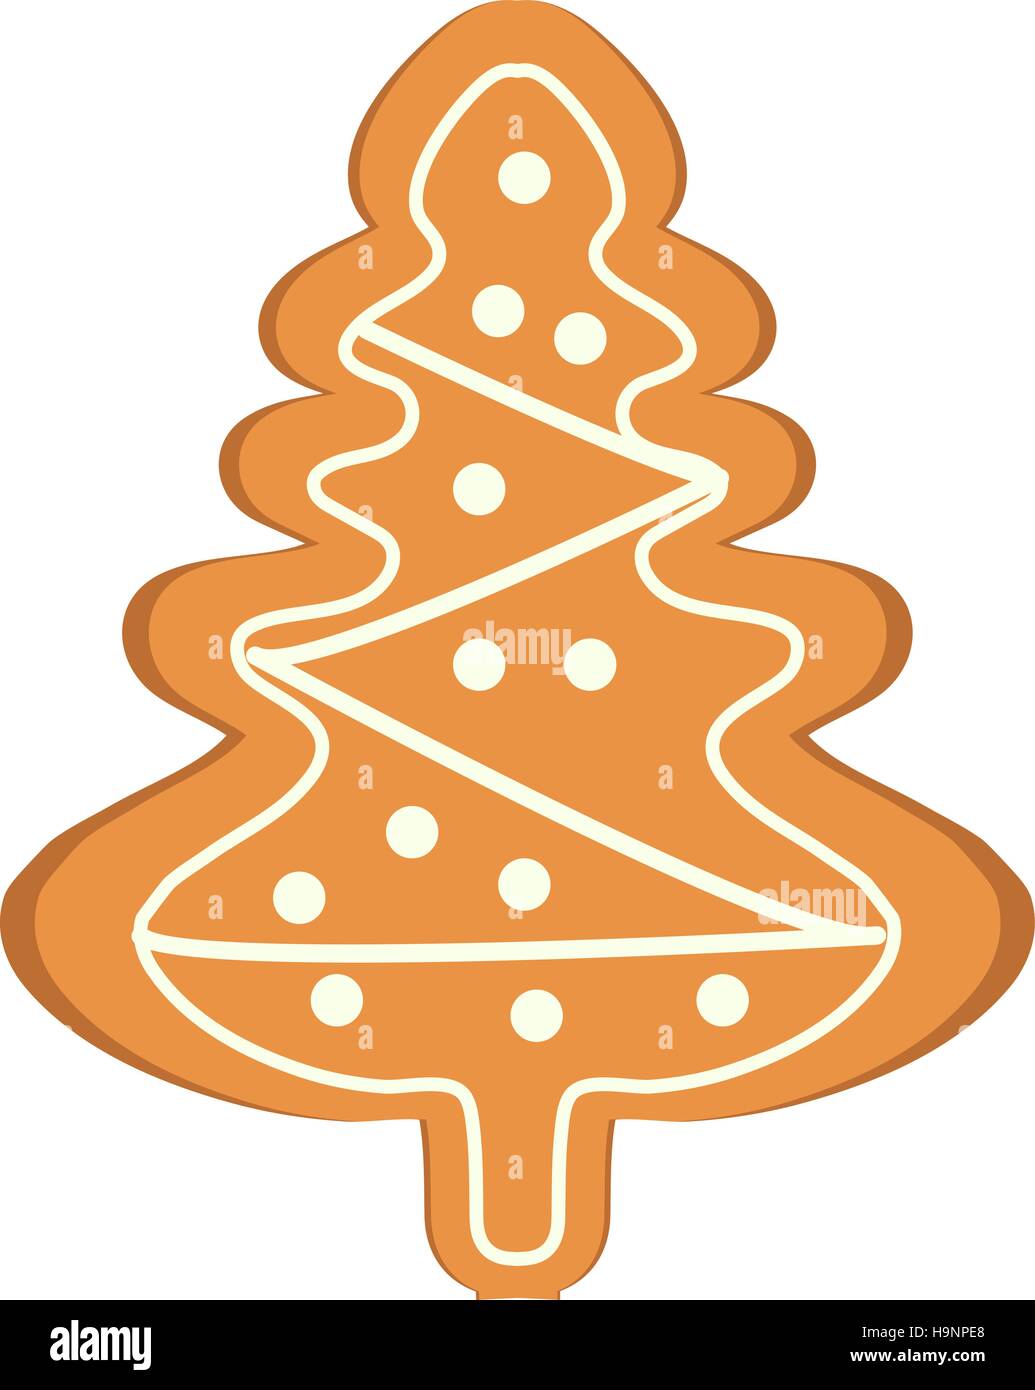 Gingerbread in the form of Christmas tree vector icon. Isolated on white background. Stock Vector